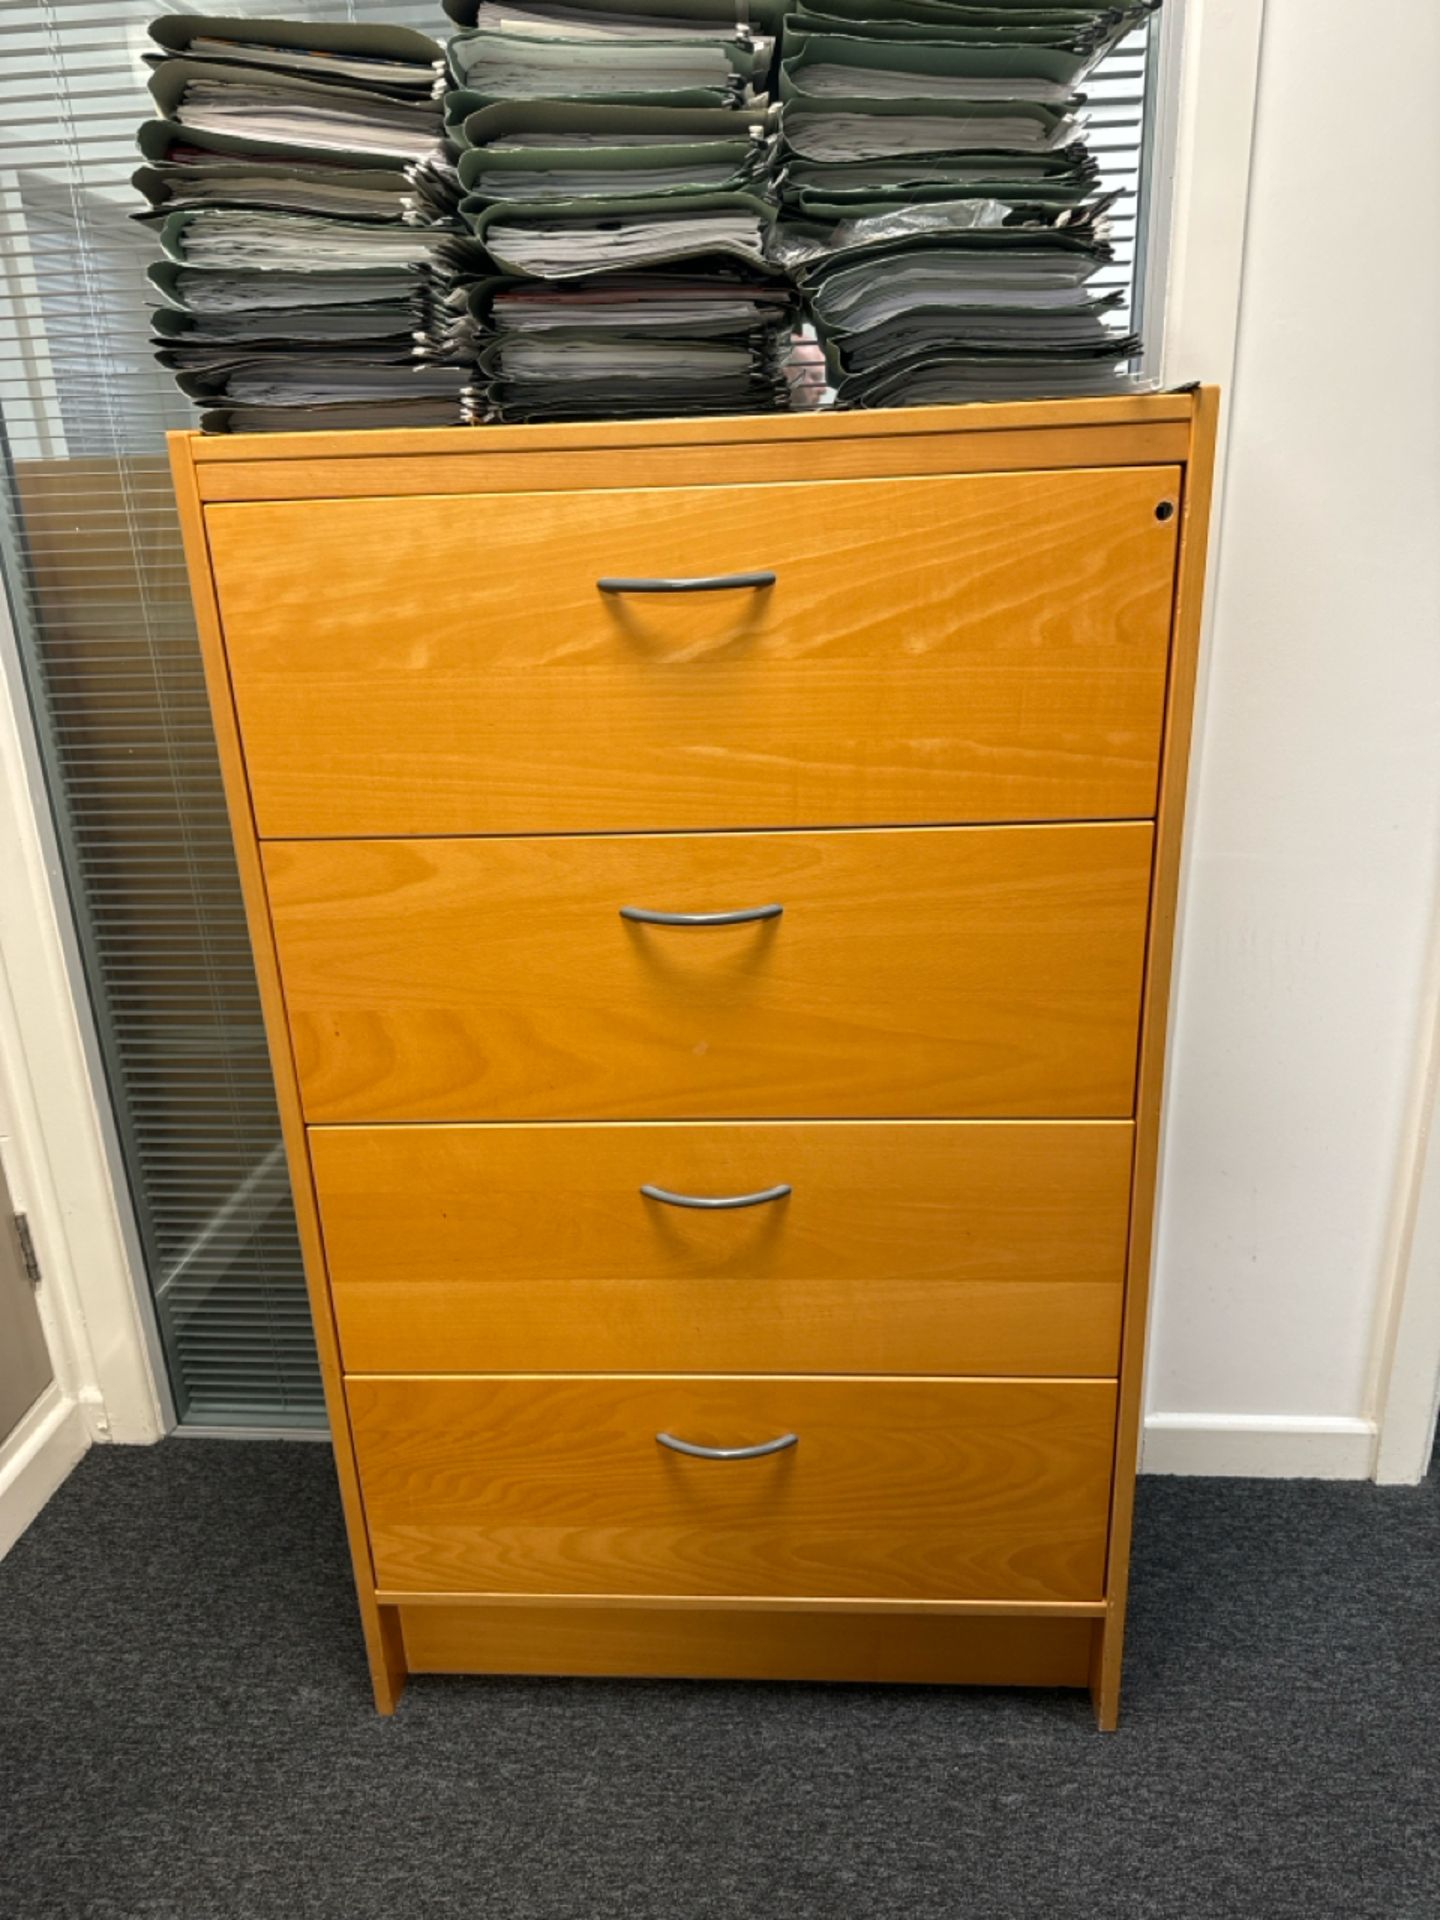 ref 184 - Wooden Drawer Unit - Image 2 of 4